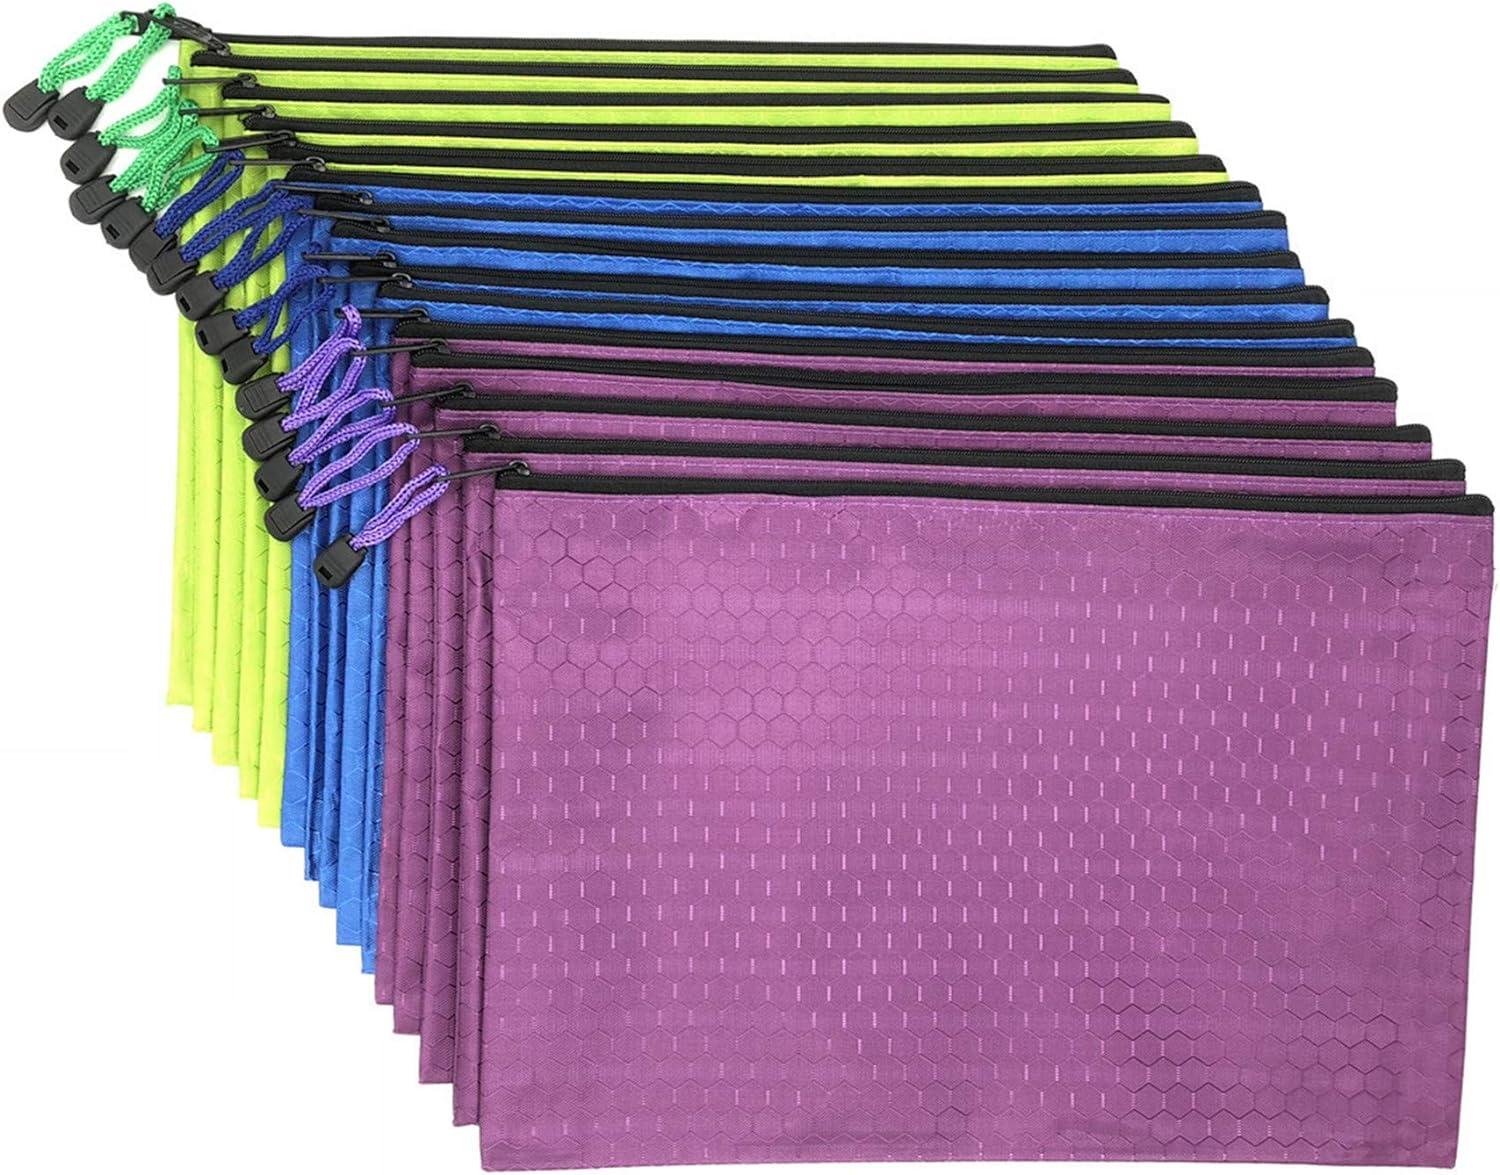 15 pcs a4 size zipper file bags 3 colors waterproof oxford bag use for business document organizer and office